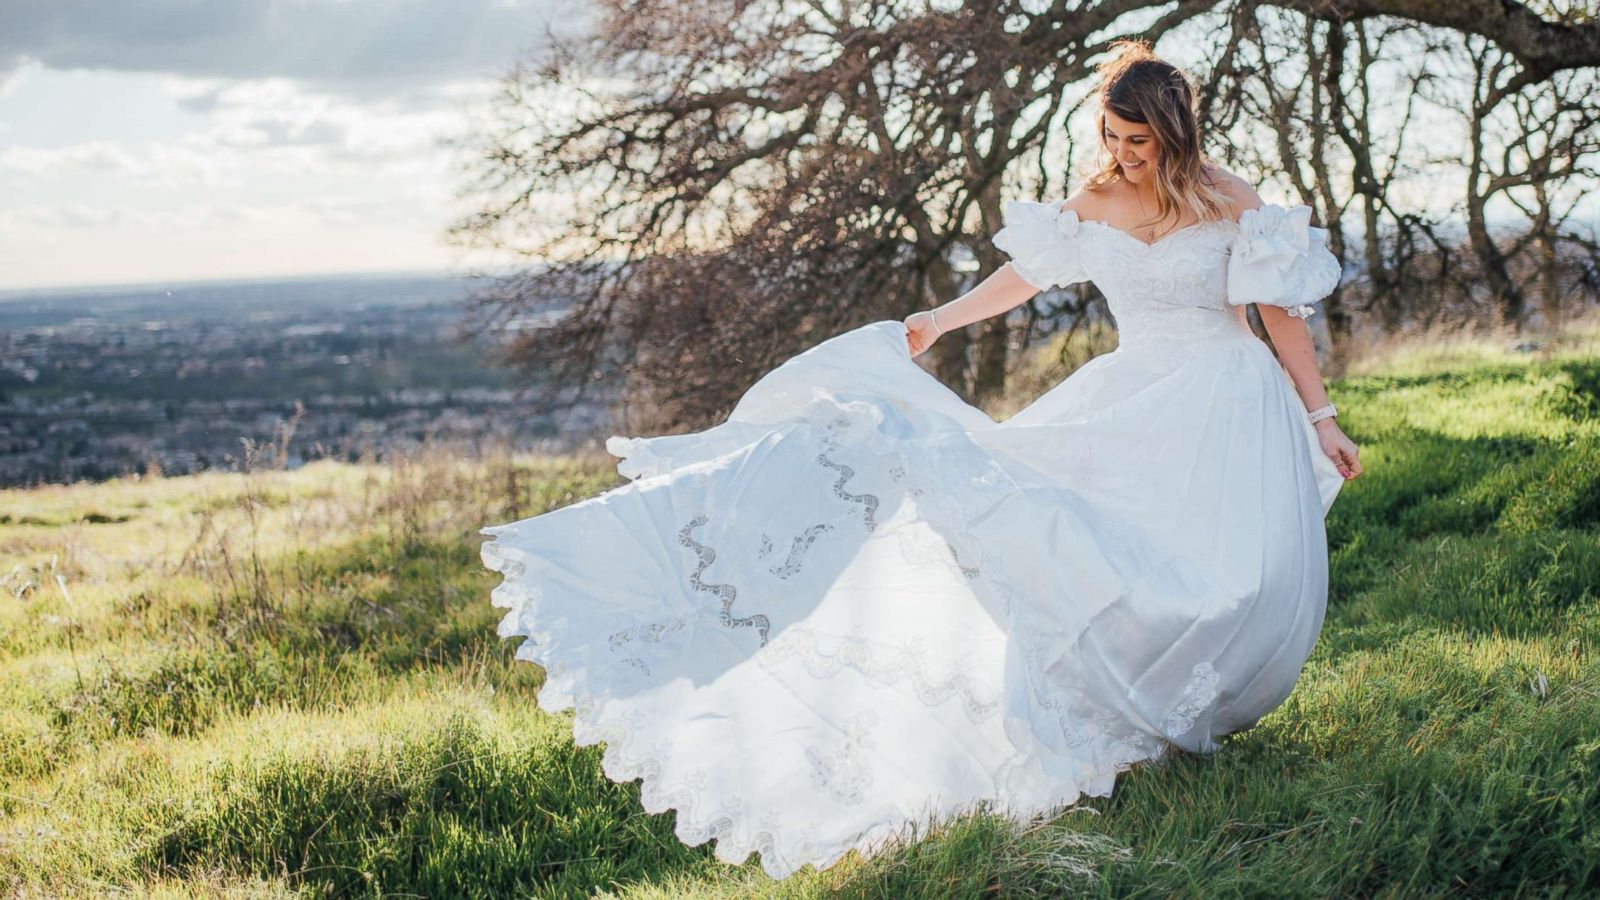 PHOTO: Future bride Shelby Sander honored her late mother with a photo shoot in El Dorado Hills, California.